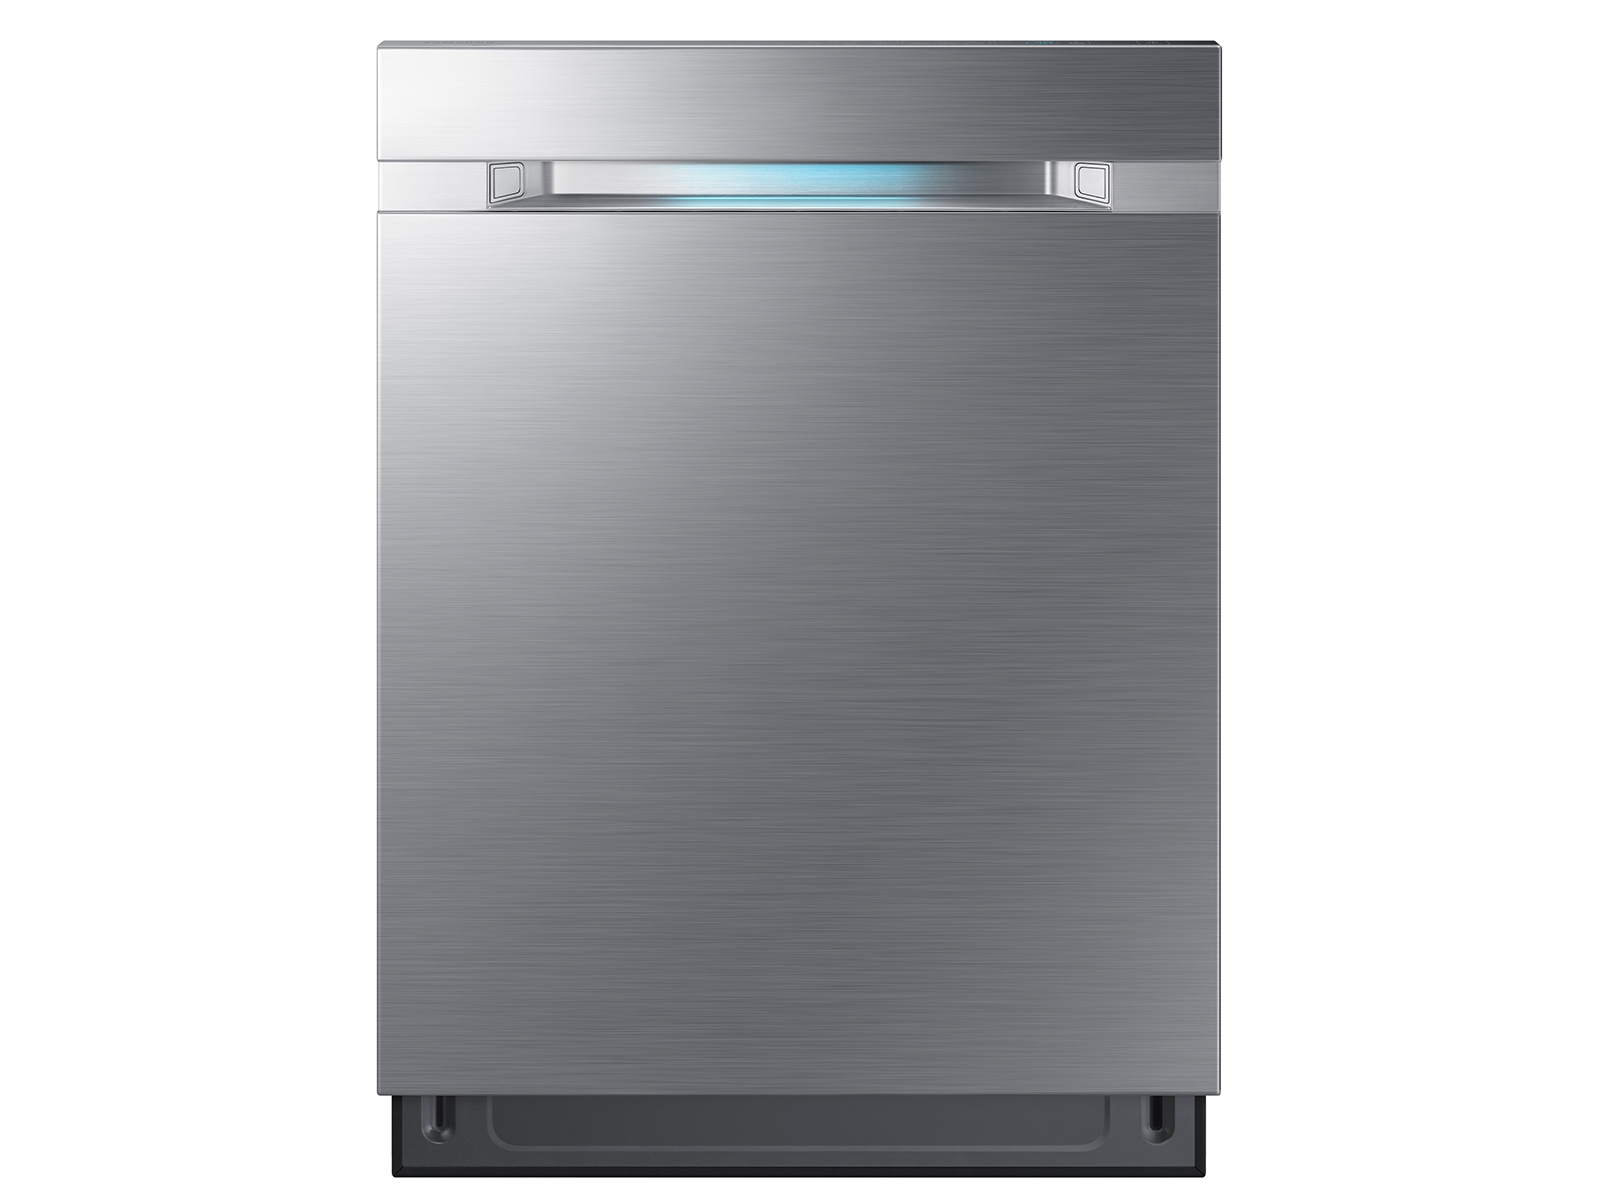 https://image-us.samsung.com/SamsungUS/home/home-appliances/dishwashers/waterwall/pd/dw80m9960us/gallery/01_Dishwasher_DW80M9550US_Front_Silver.jpg?$product-details-jpg$